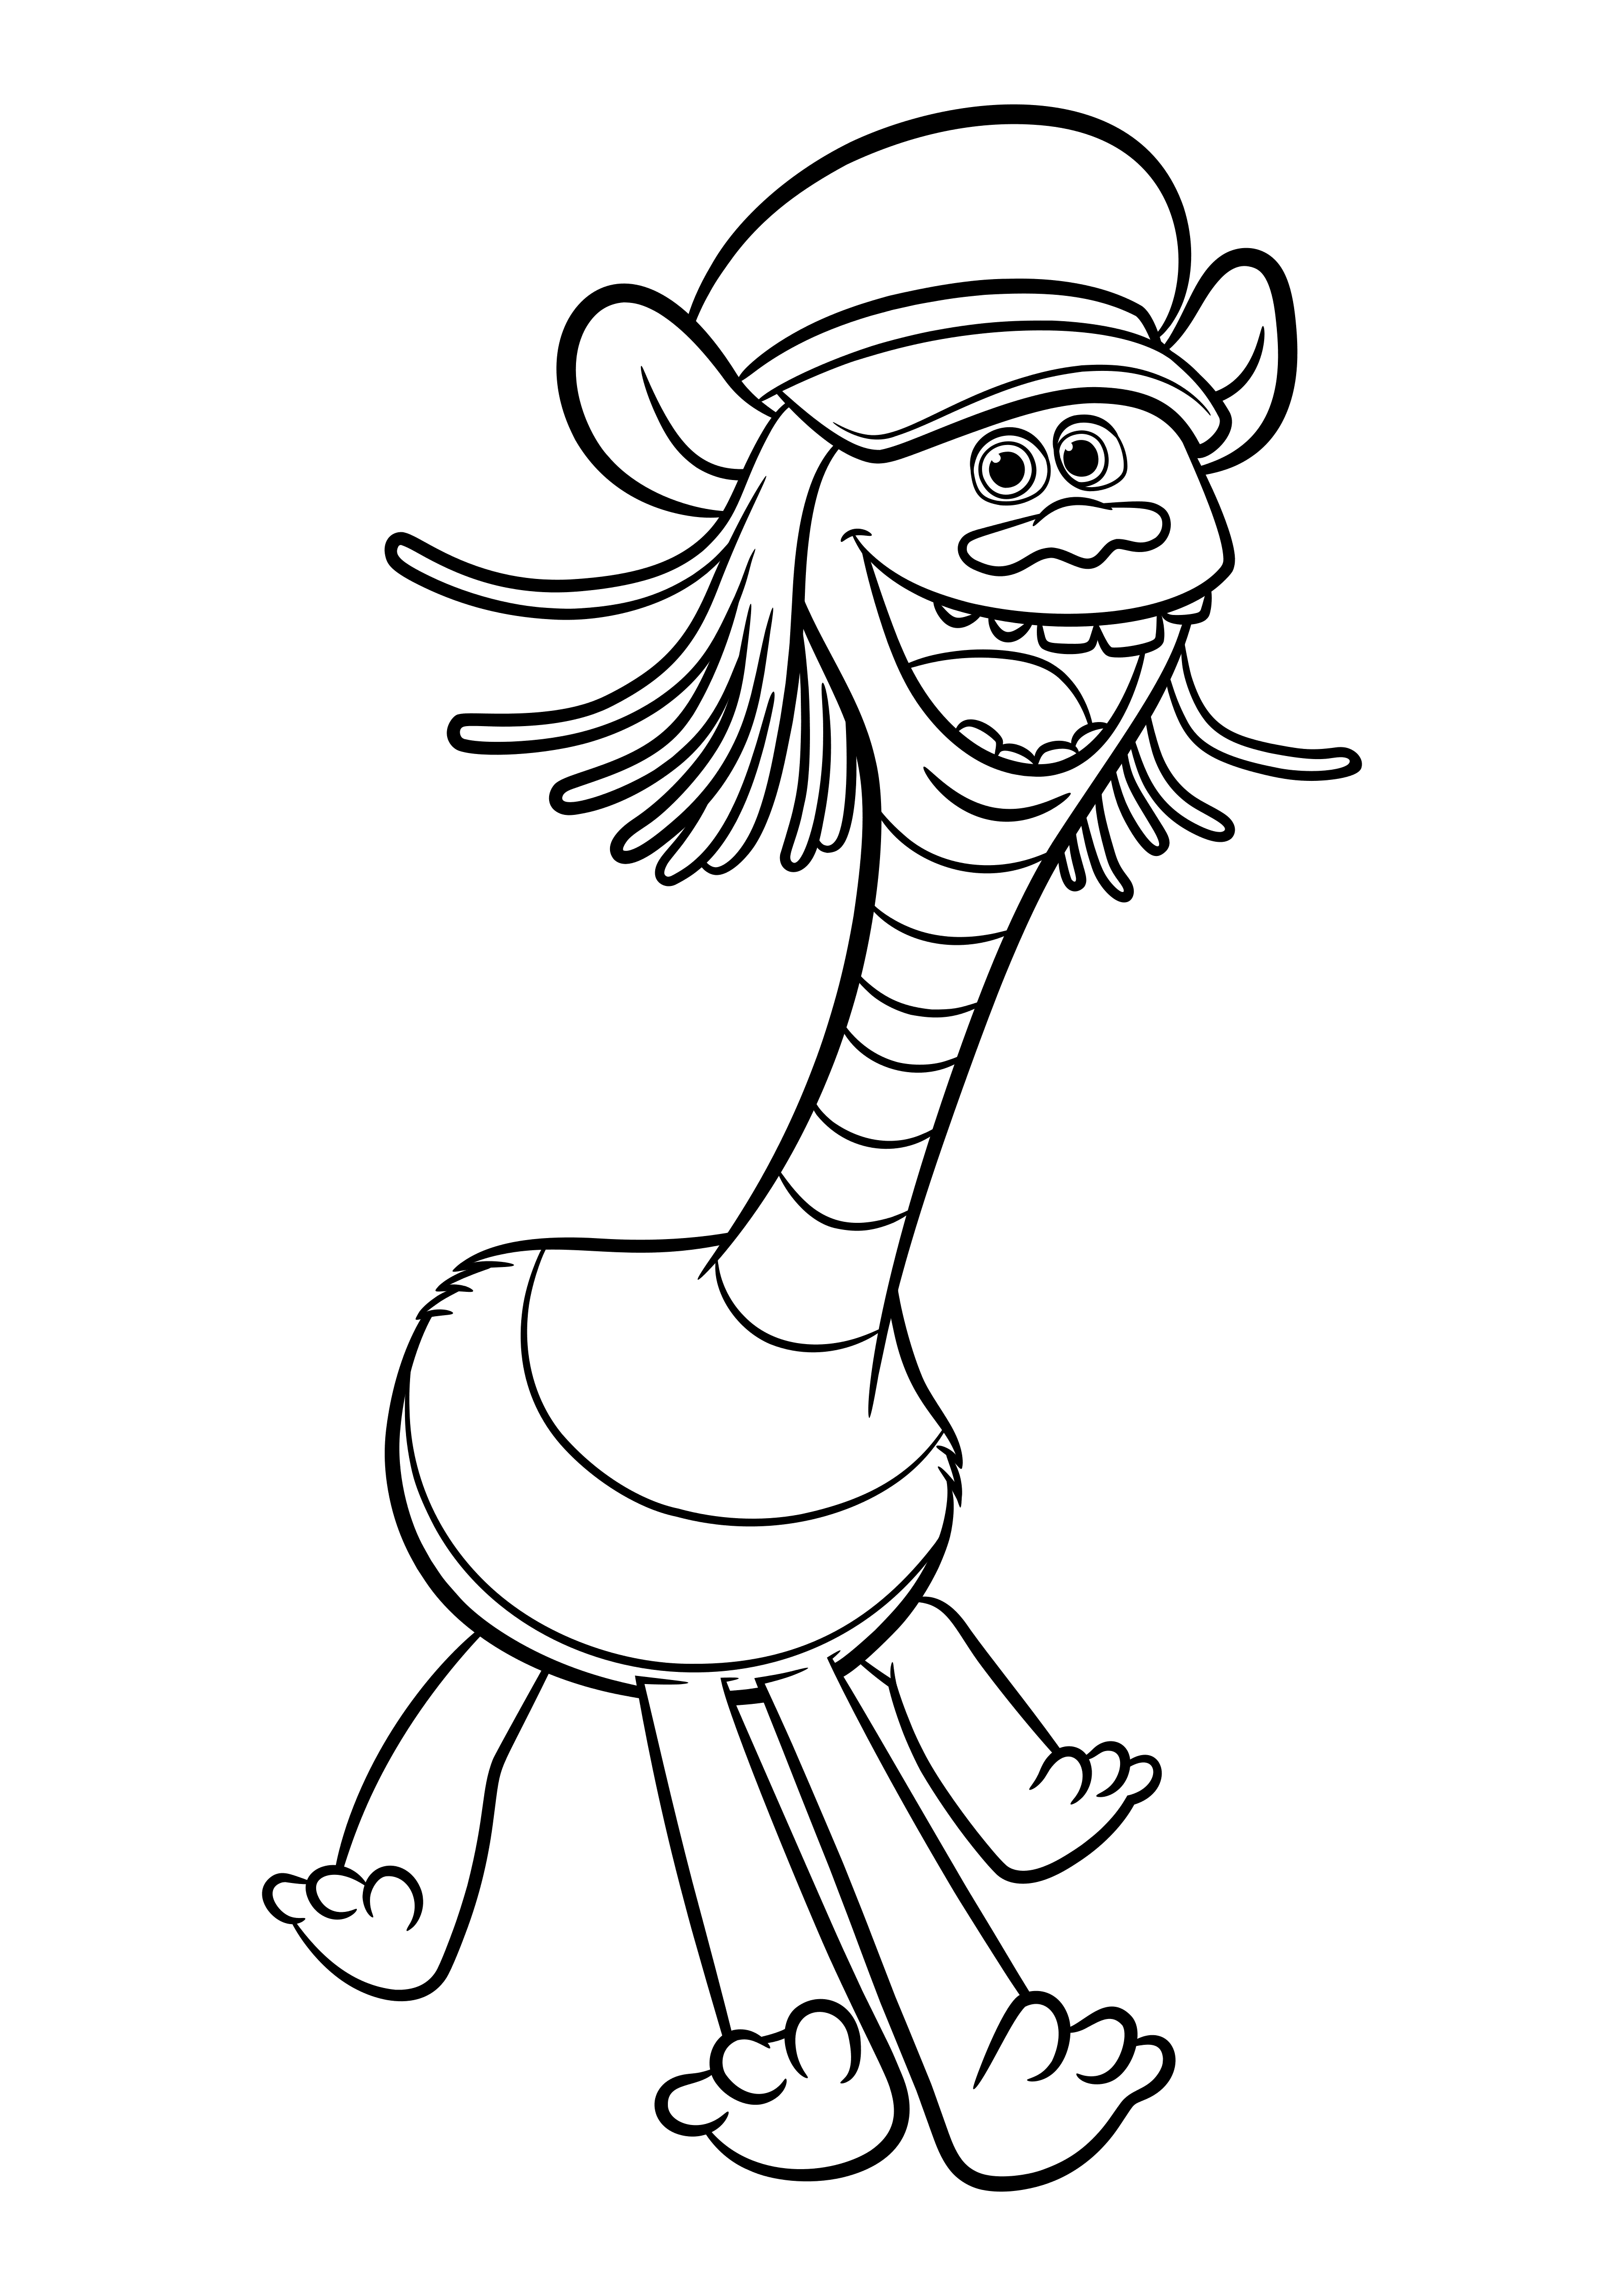 free coloring pages download trolls coloring pages to download and print for free coloring free pages download 